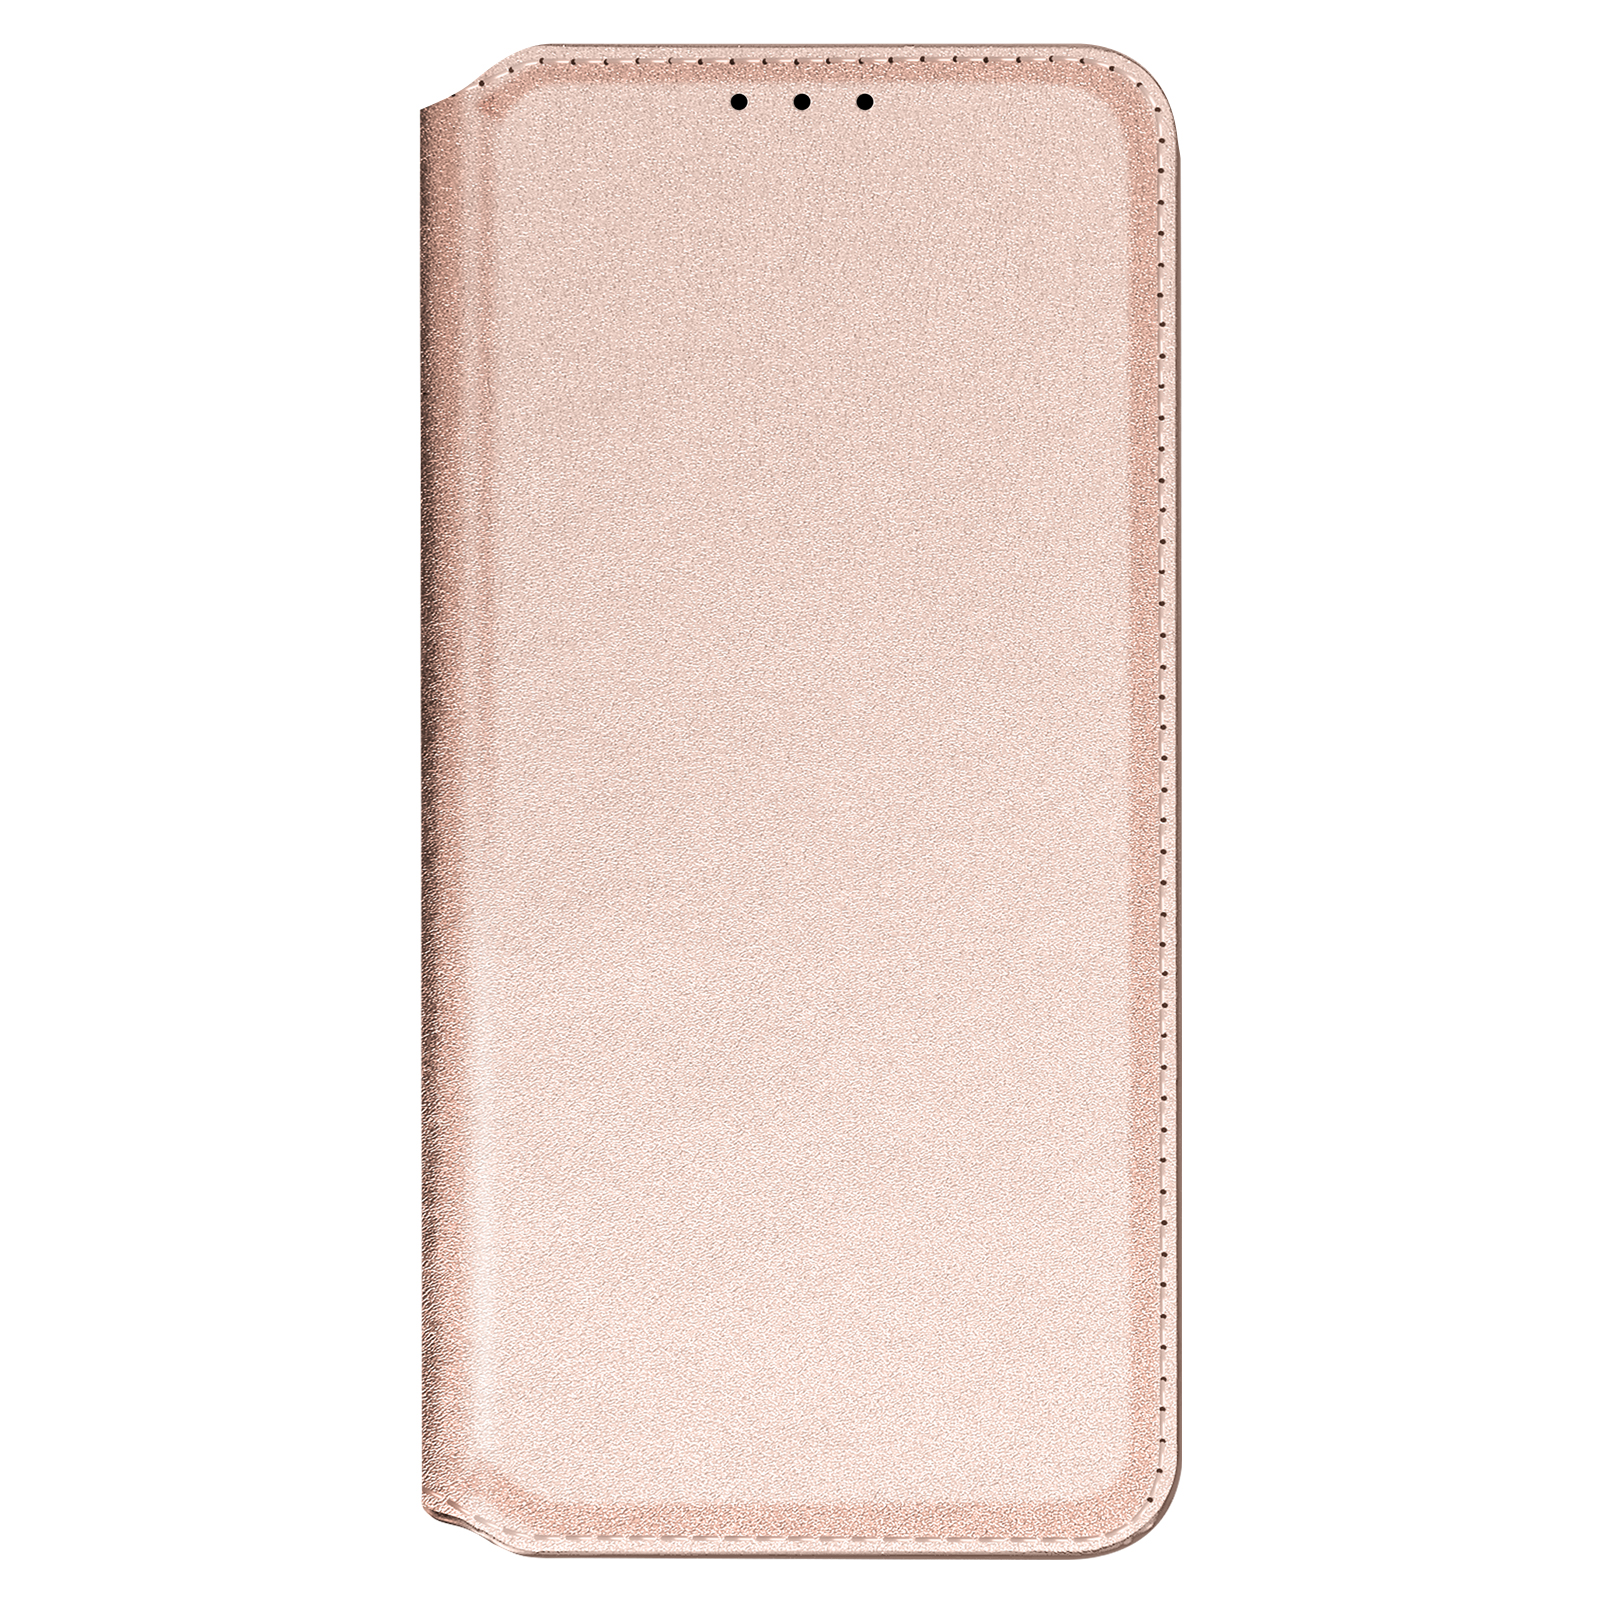 AVIZAR Classic Magnetklappe Wiko mit Bookcover, Rosegold Backcover Y81, Edition, Wiko, Series